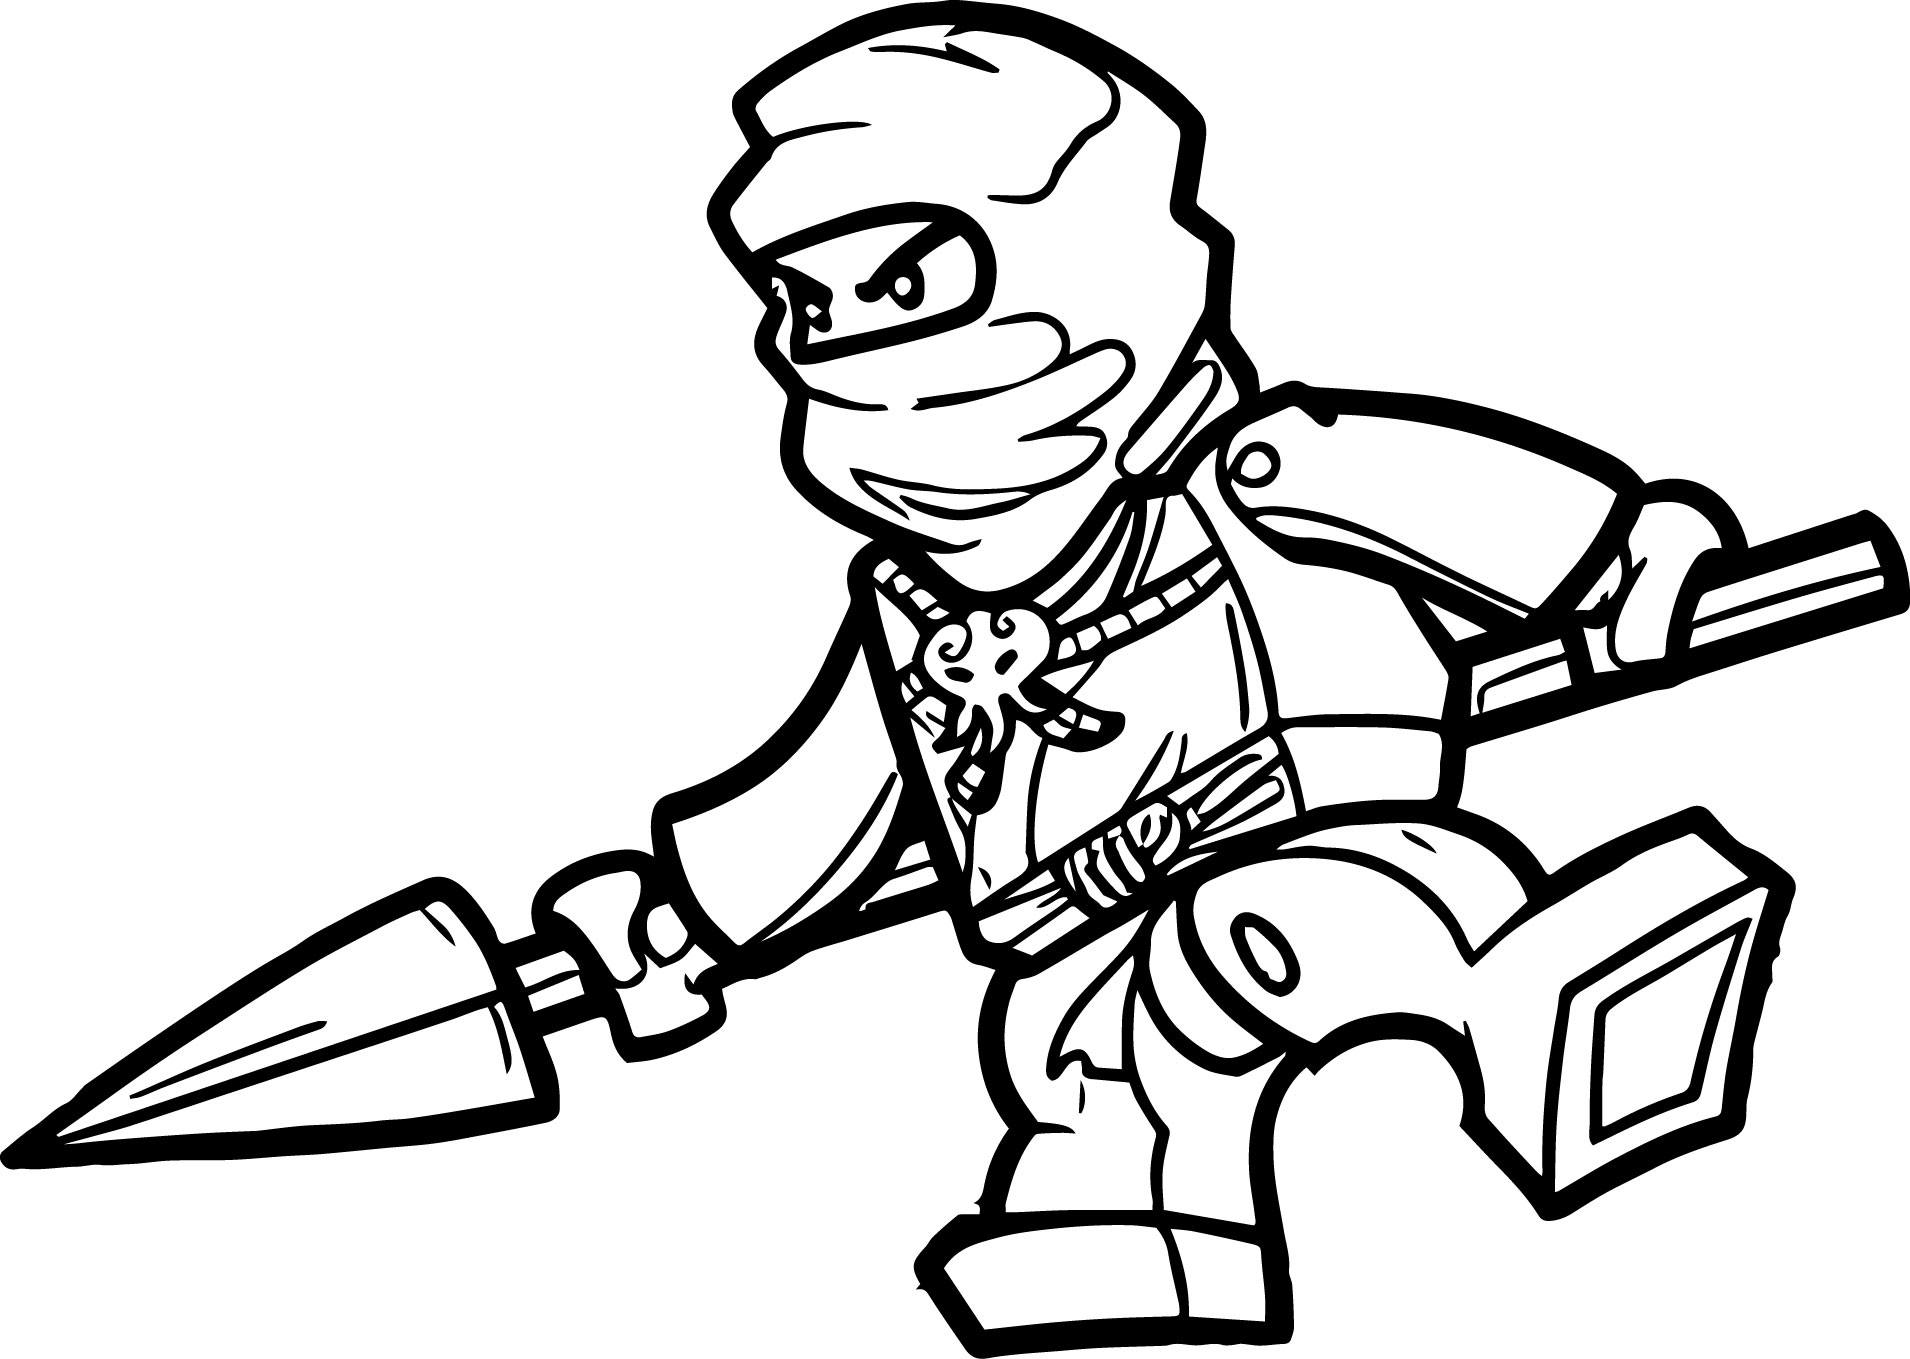 Jay Ninjago Coloring Pages Coloring Ideas Ninjago Kai Coloring Pages Marvelous Picture